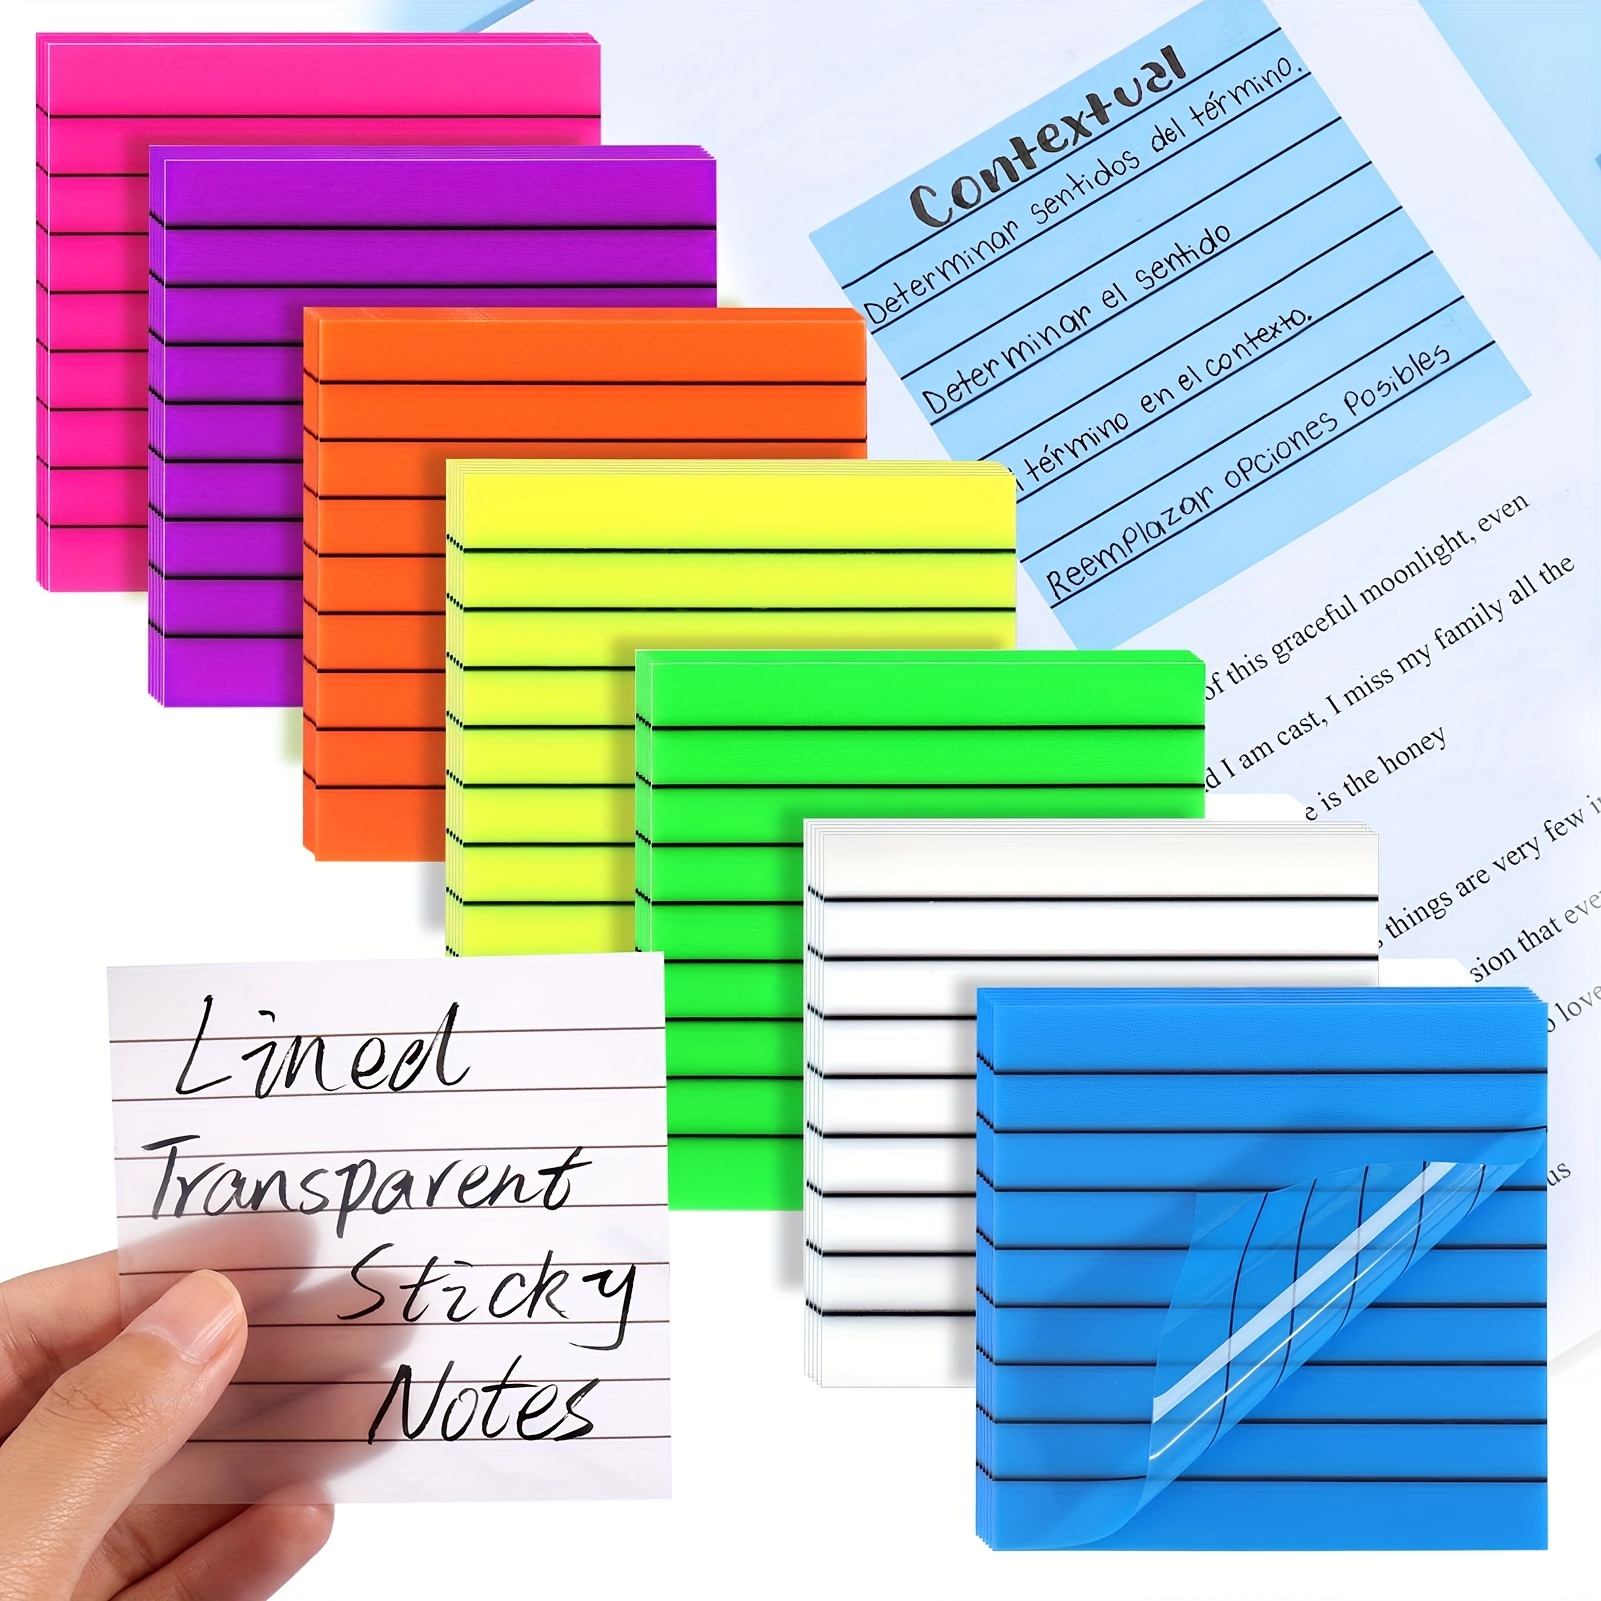  Pro Stickies Sticky Notes with Square Adhesive - 500